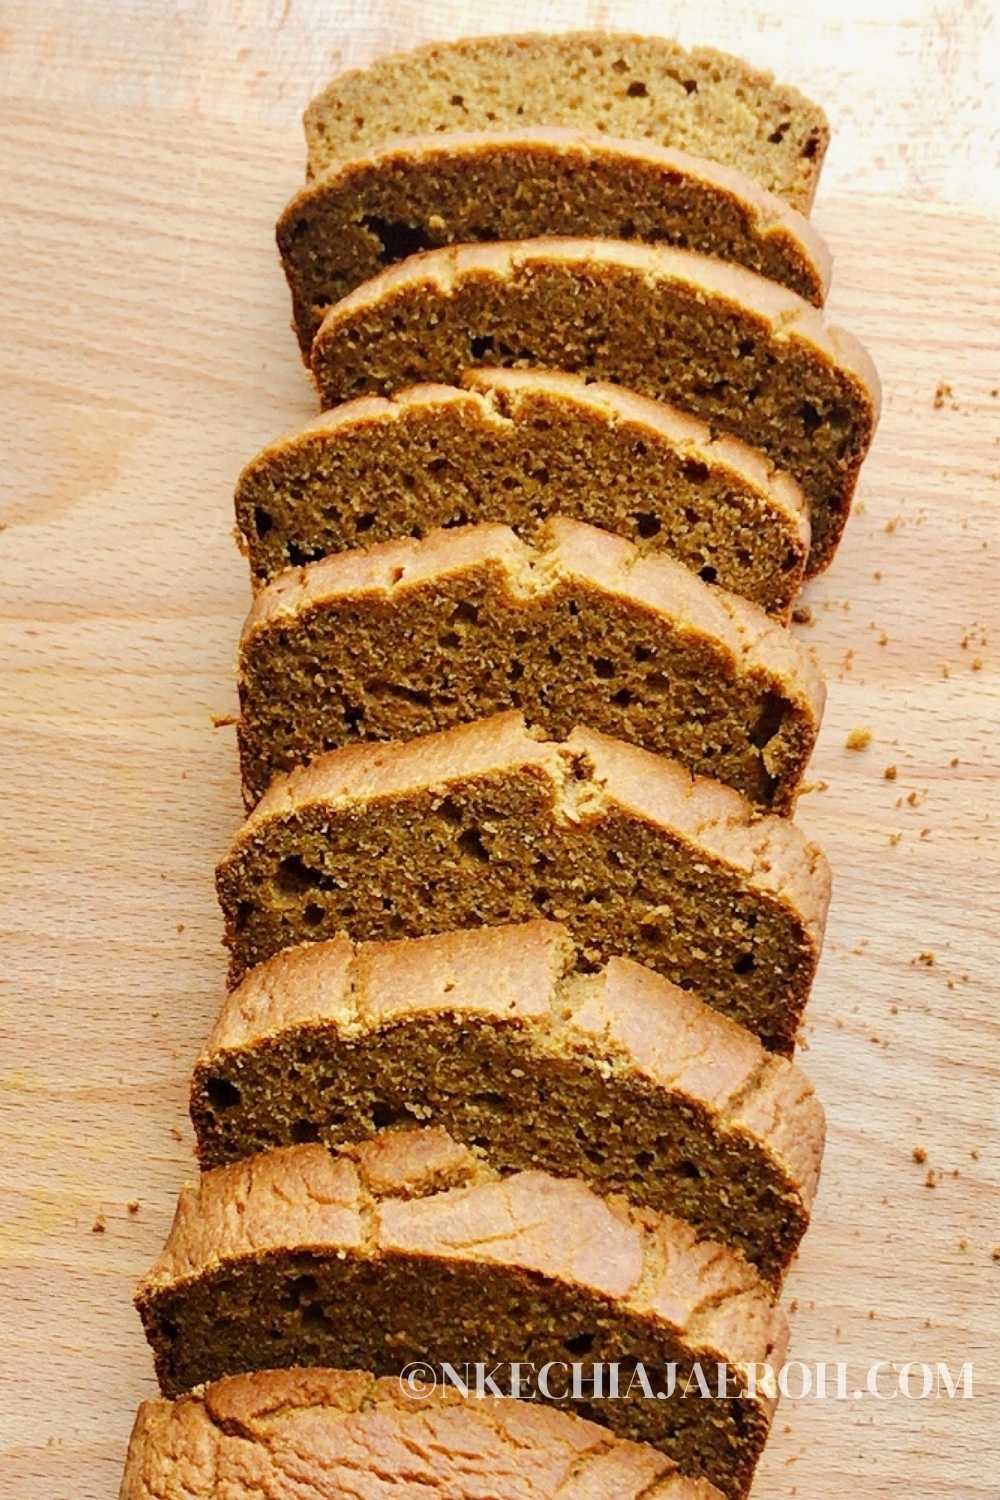 The perfect treat for fall is here with my healthy pumpkin bread! Made with fresh pumpkin puree, it is as nutritious as it is delicious. It’s ideal for breakfast, dessert, or even as a snack! This recipe takes healthy ingredients and turns them into a quick bread that’s got all that pumpkin-spiced flavor for fall. Plus, pumpkin is great for good heart health and is loaded with vitamins and minerals that your body needs.